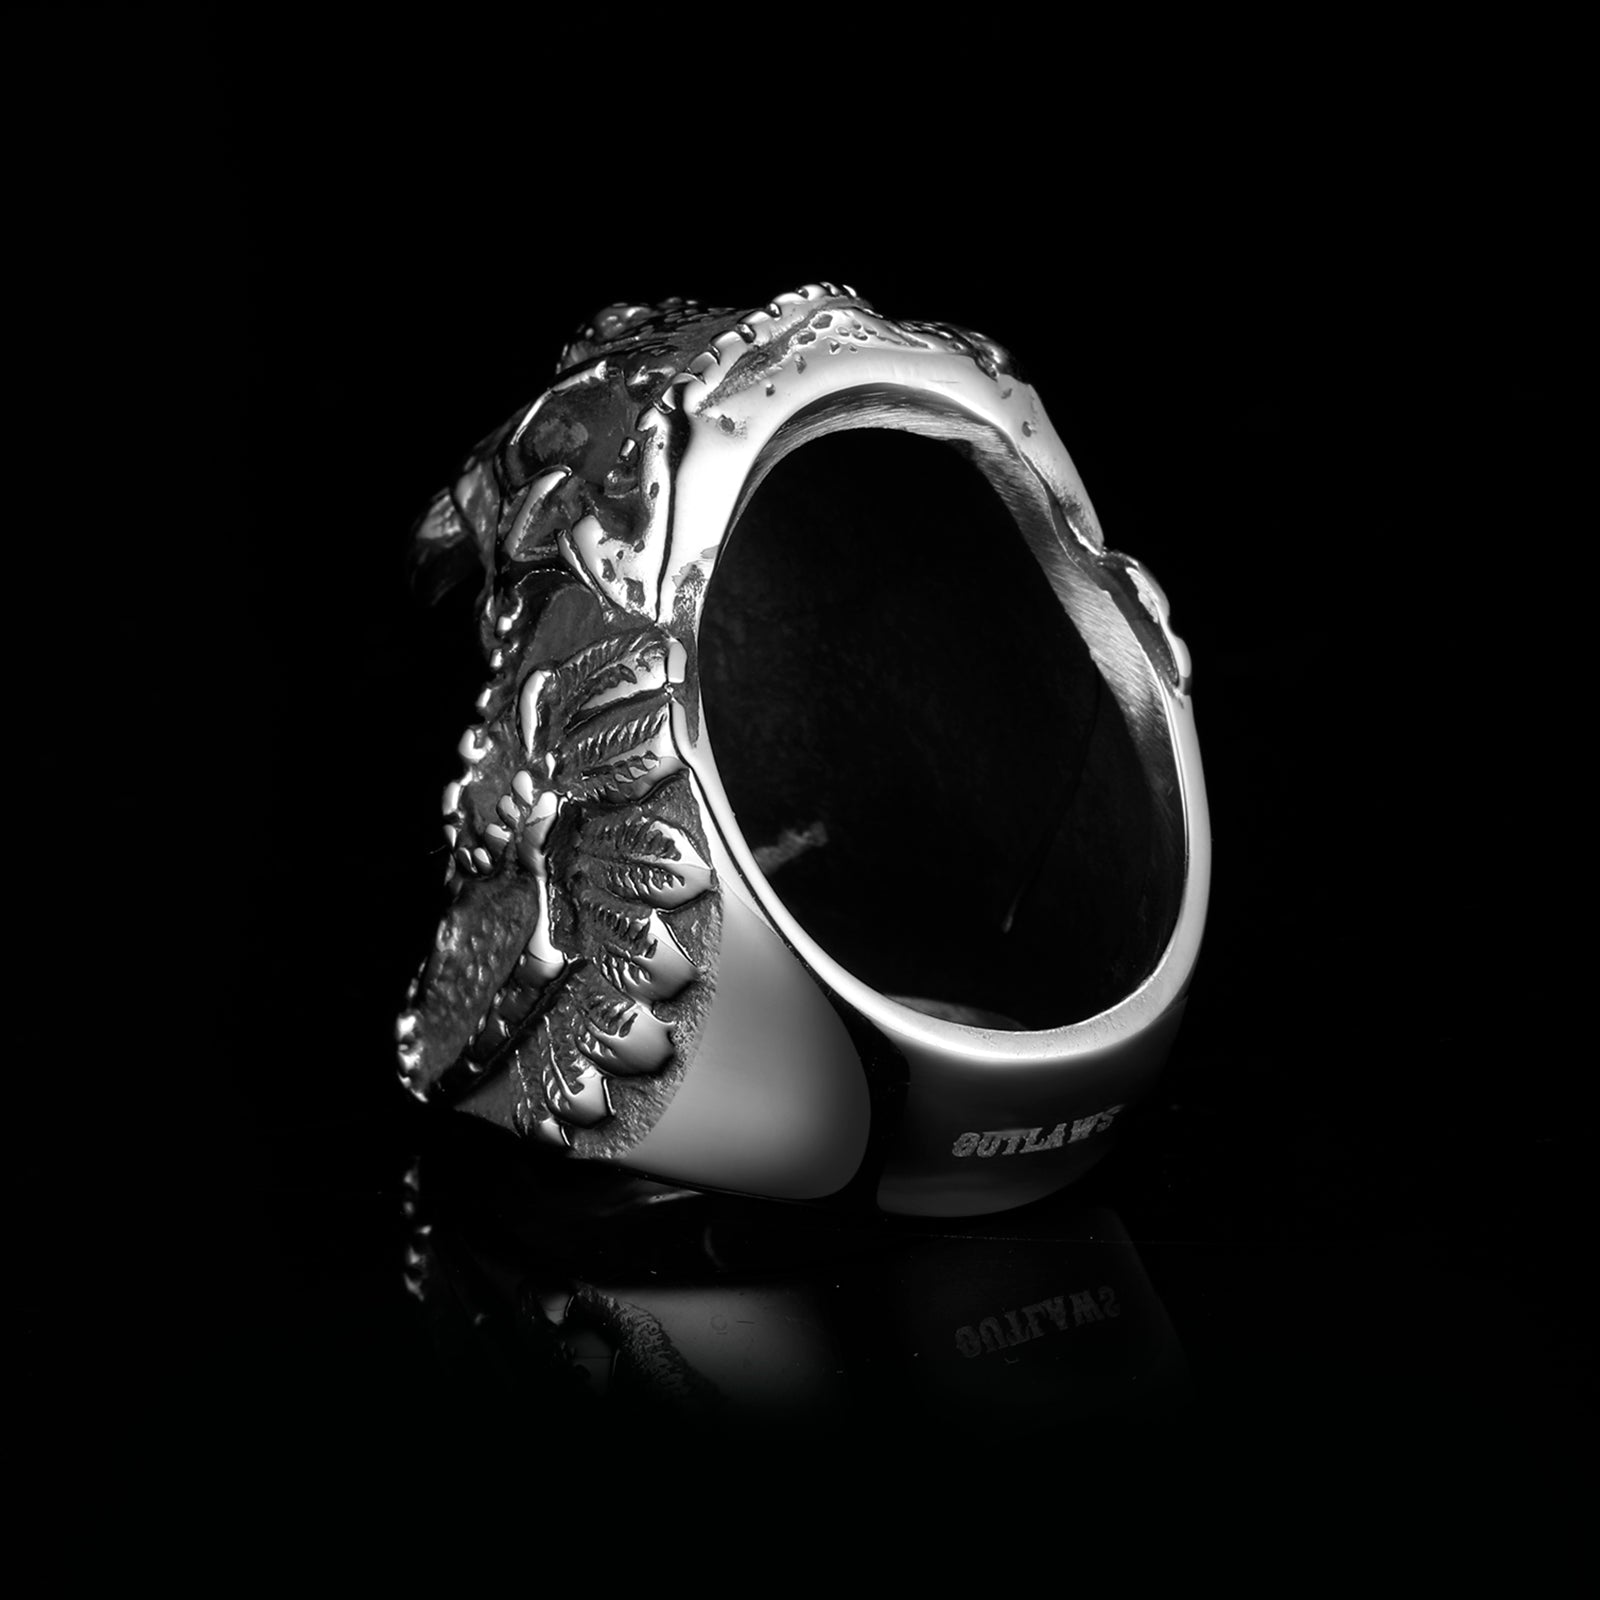 DEATH EATER. Ring